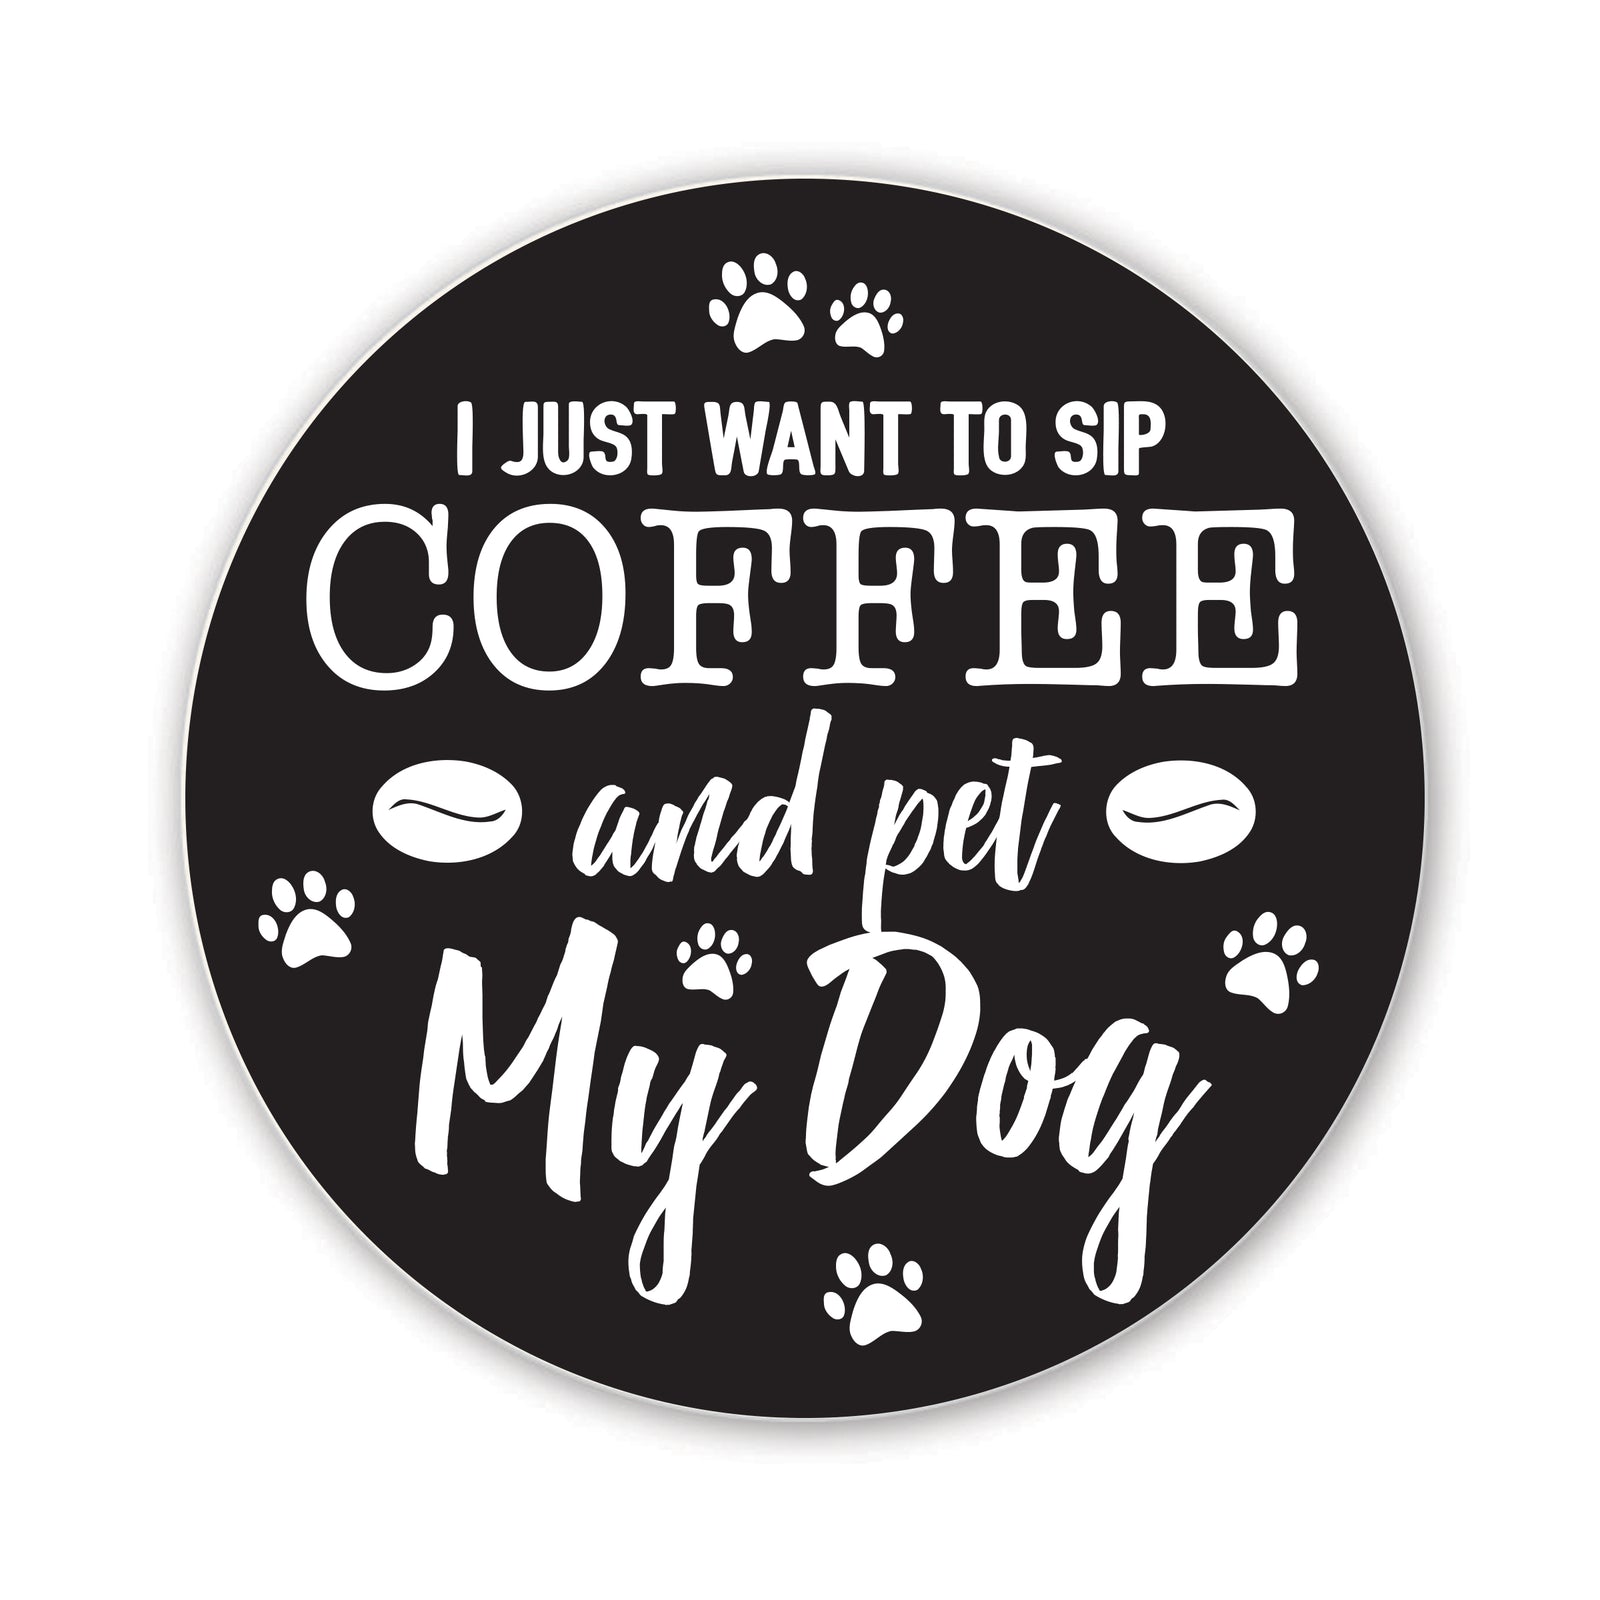 Refrigerator Magnet Perfect Gift Idea For Pet Owners - I Just Want To Sip Coffee